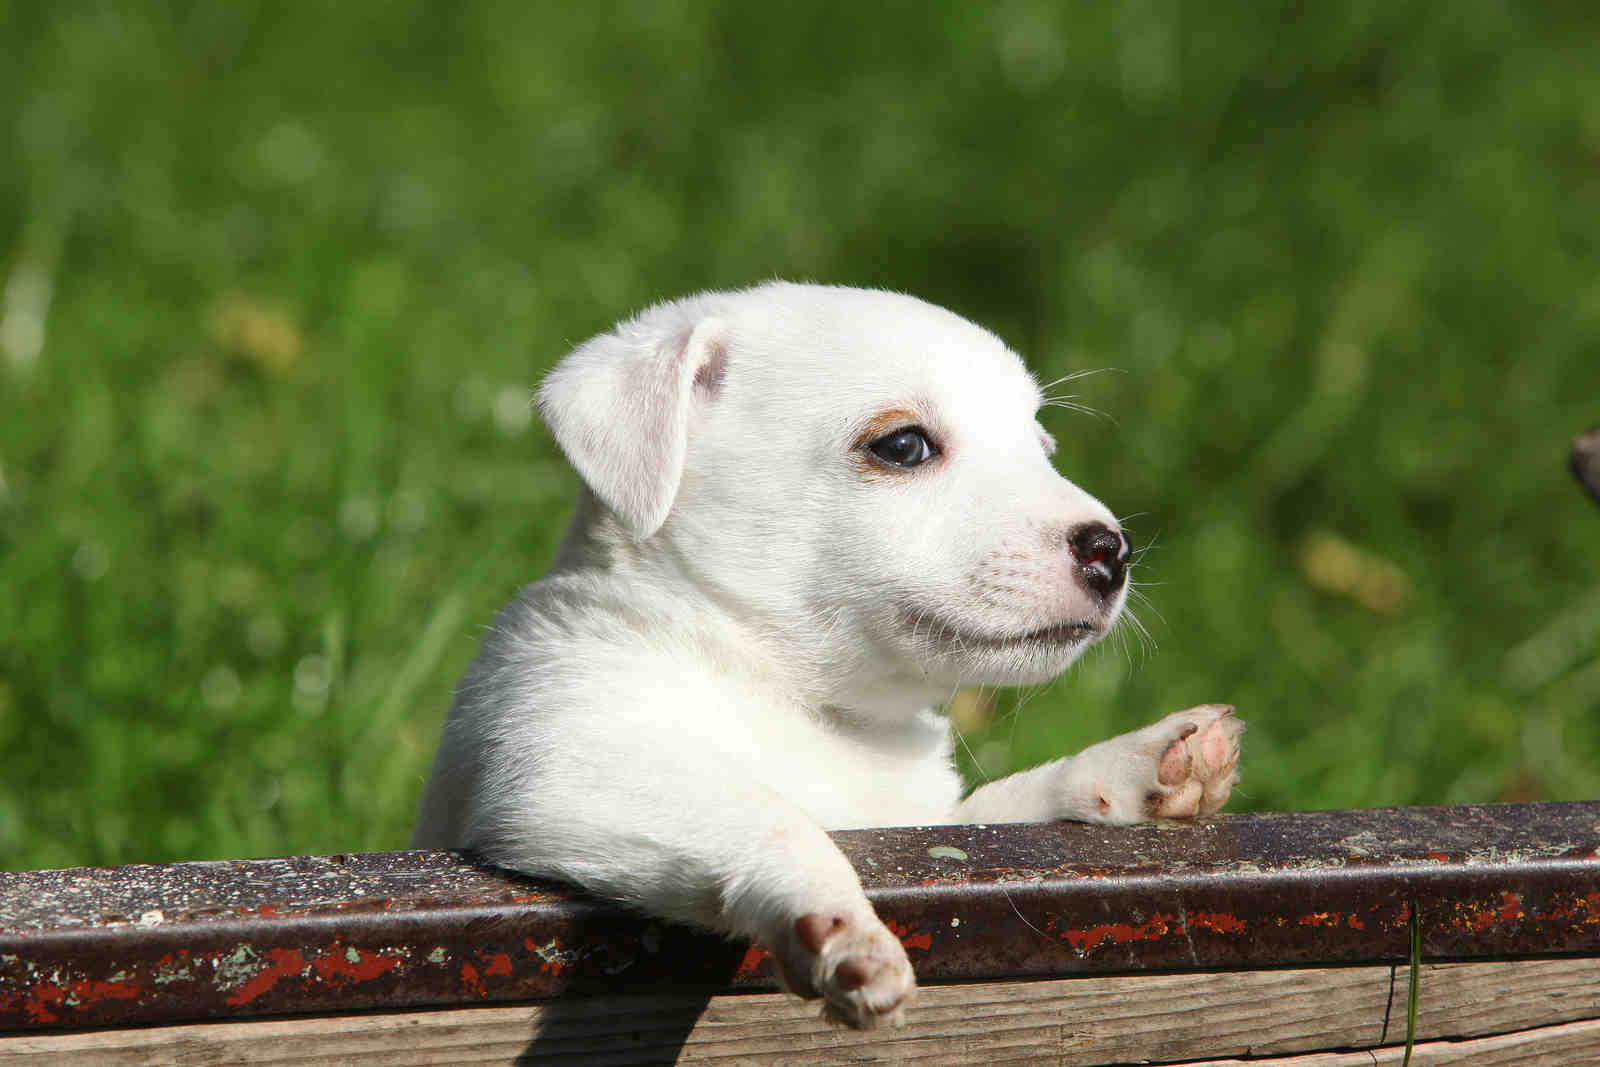 Which dog breed is the friendliest?